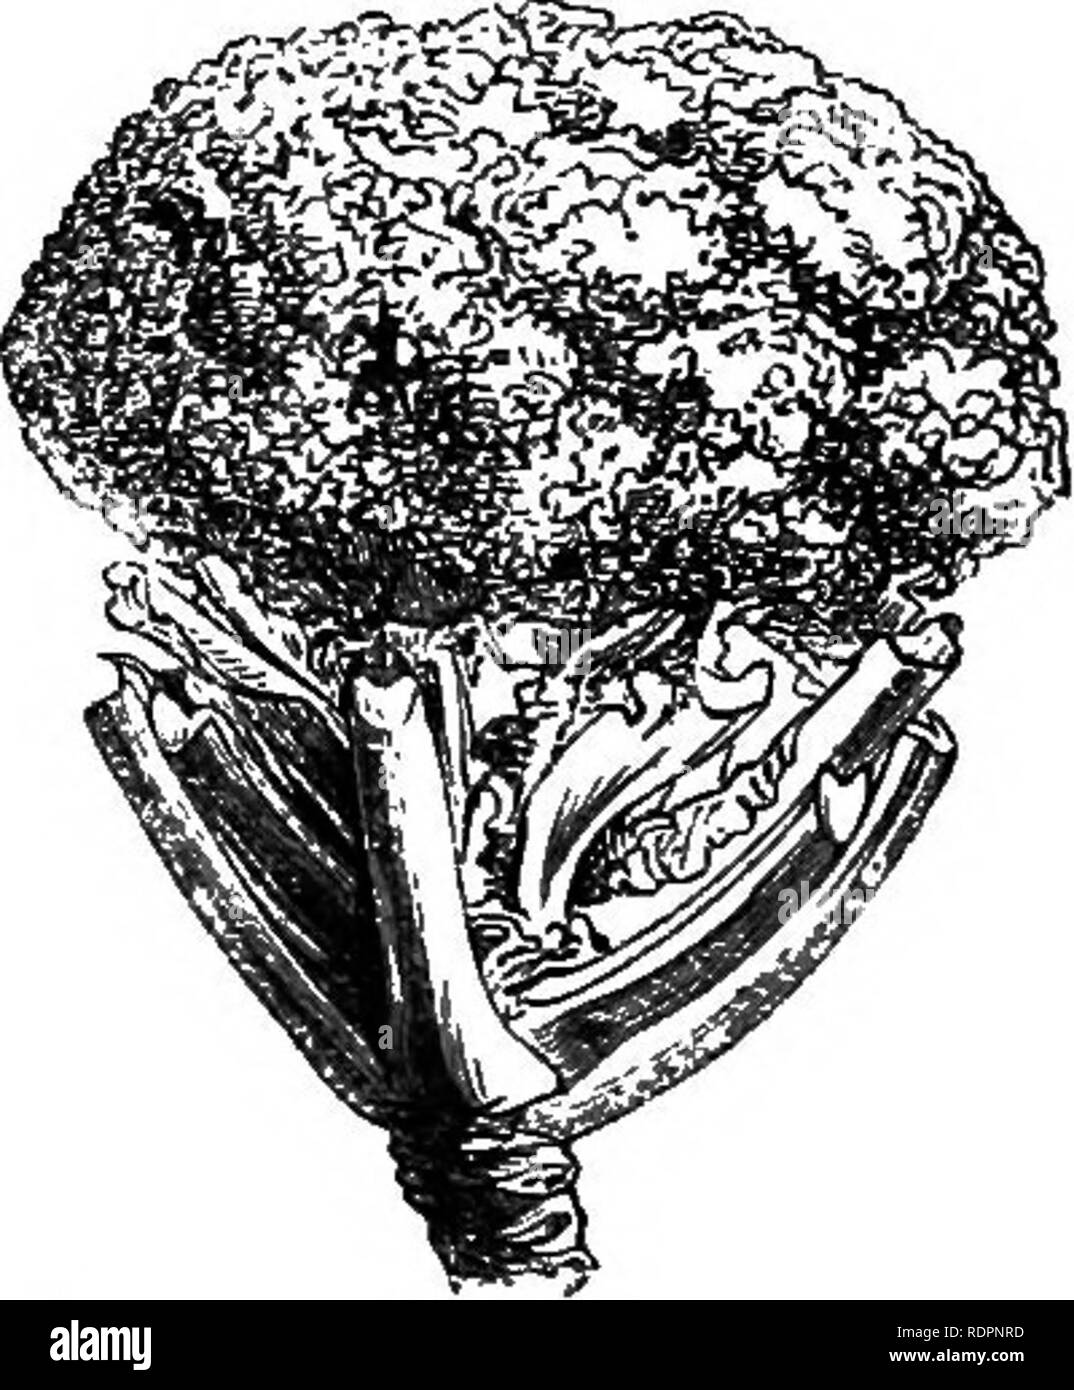 . My garden, its plan and culture together with a general description of its geology, botany, and natural history. Gardening. Fig. 15S.—Kohl Rabi,  diam.. Fig. 157. —Brussels SprouCSj  dlam. Fig. 159.—Cauliflower, J diam. Kohl Rabi {Brassica Carlo Rapes caudo, fig. 158) is sometimes grown at my garden for the cattle. Occasionally we have cooked it by way of experiment, but it is, at best, an indifferent vegetal. The seed is sown in February and planted out in May, when by autumn the bulbs are fairly formed. It is particularly adapted for dry summers, as the hotter and drier the summer, the f Stock Photo